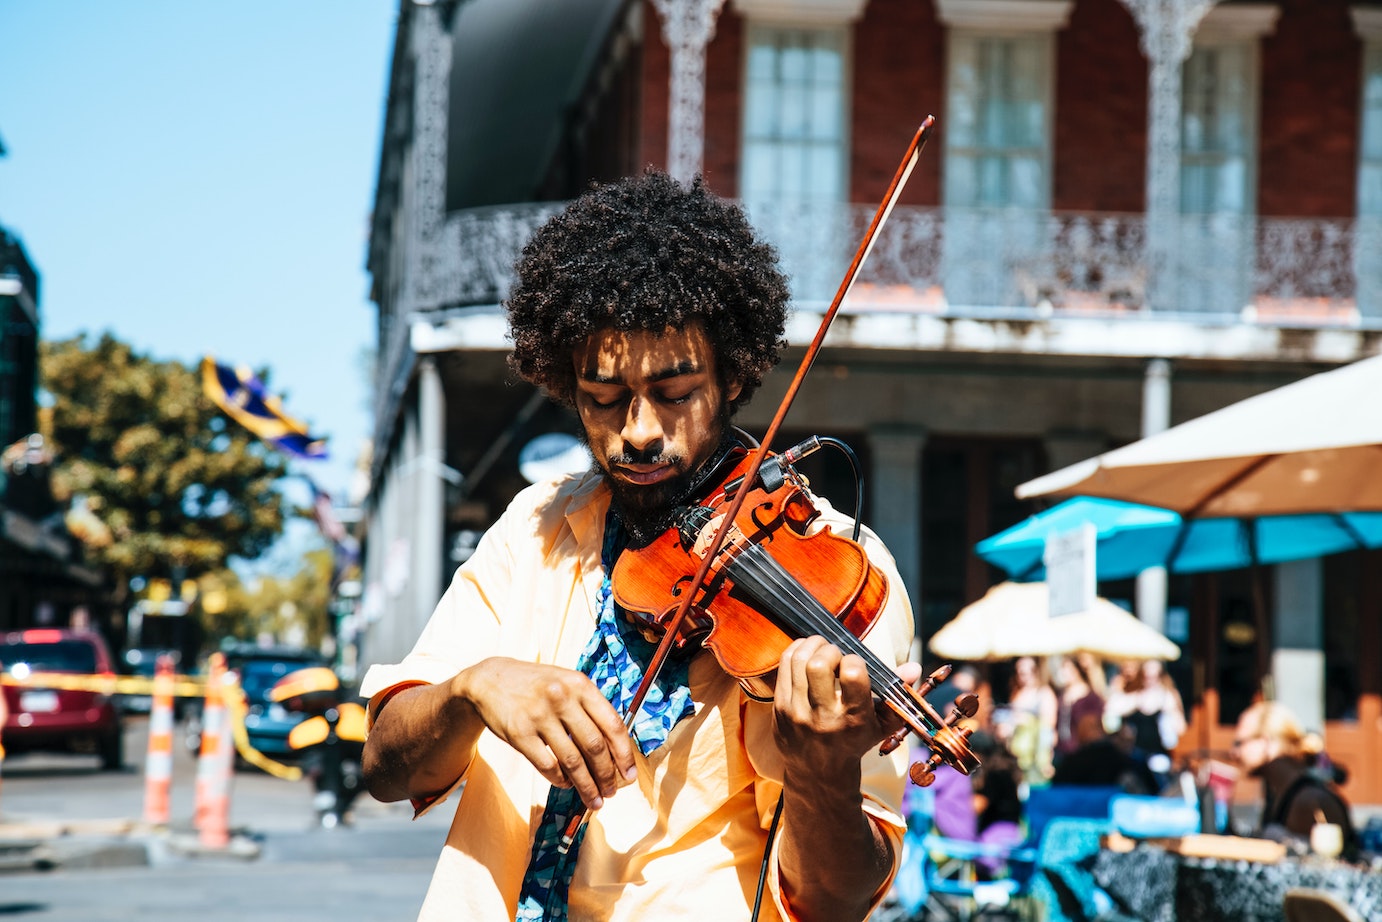 Man playing violin on the street